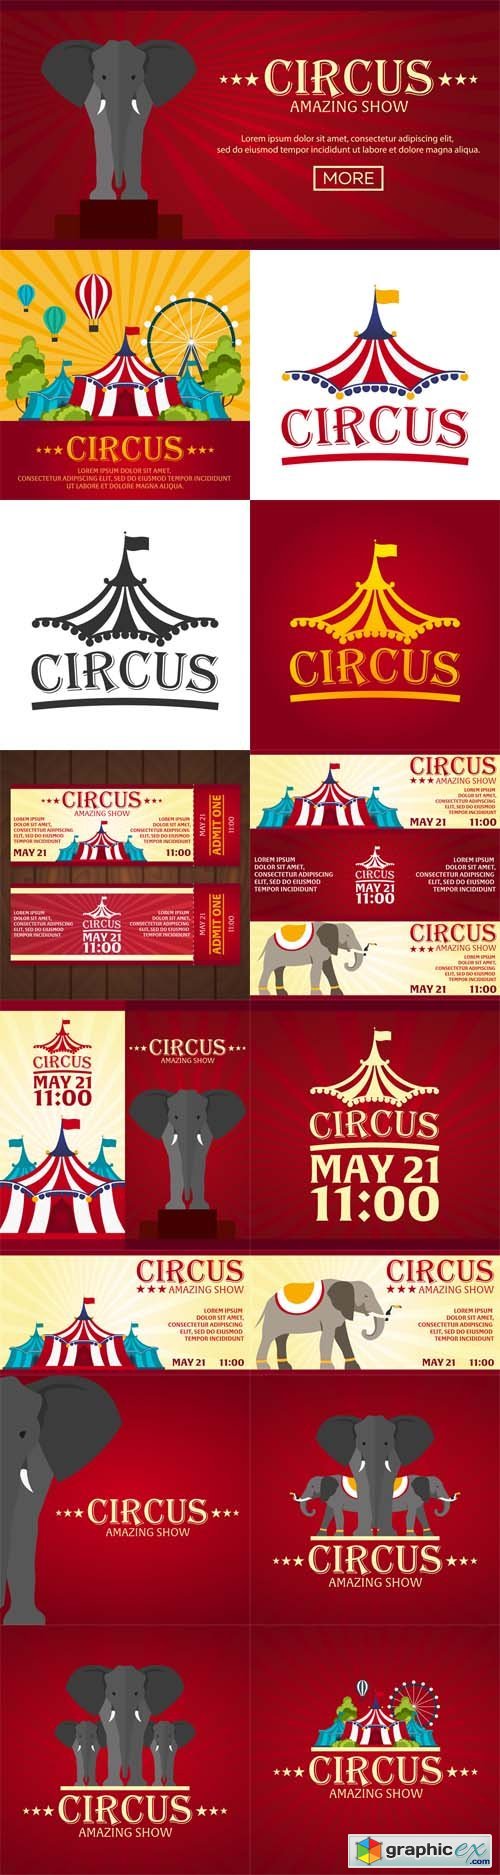 Circus Banners, Tickets. Flat Design